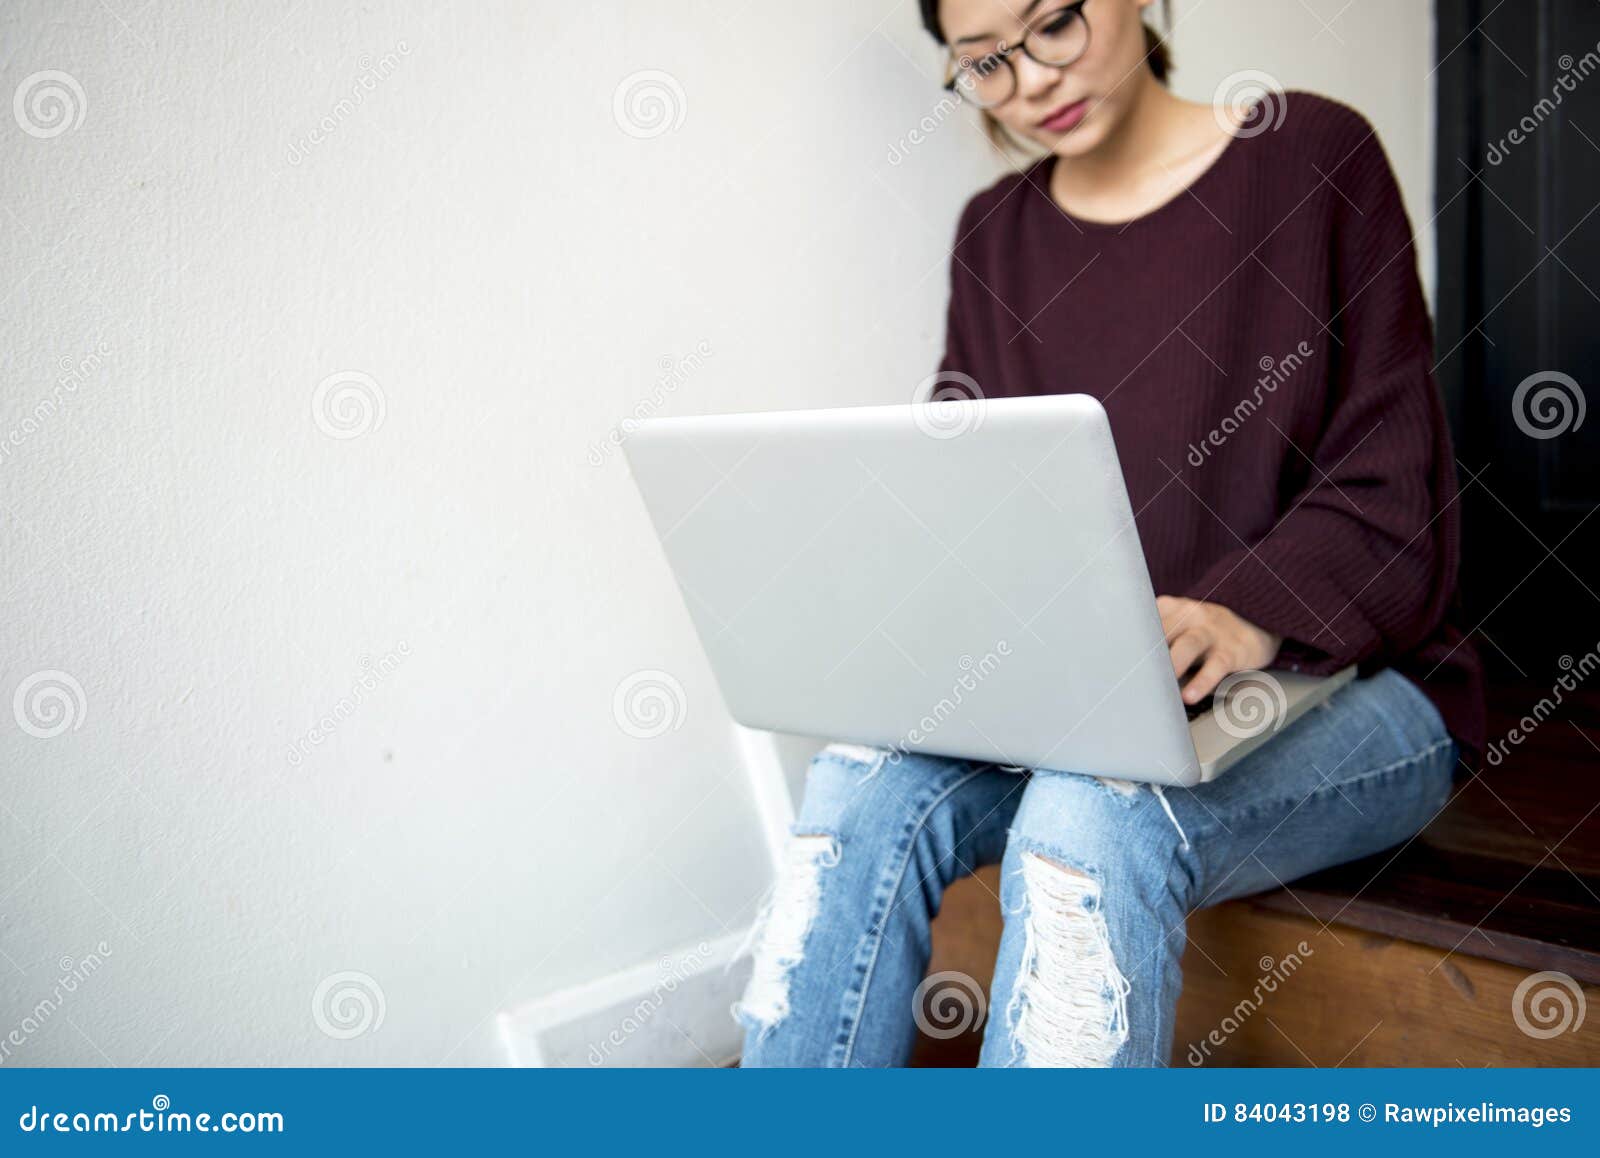 woman working using laptop techie concept